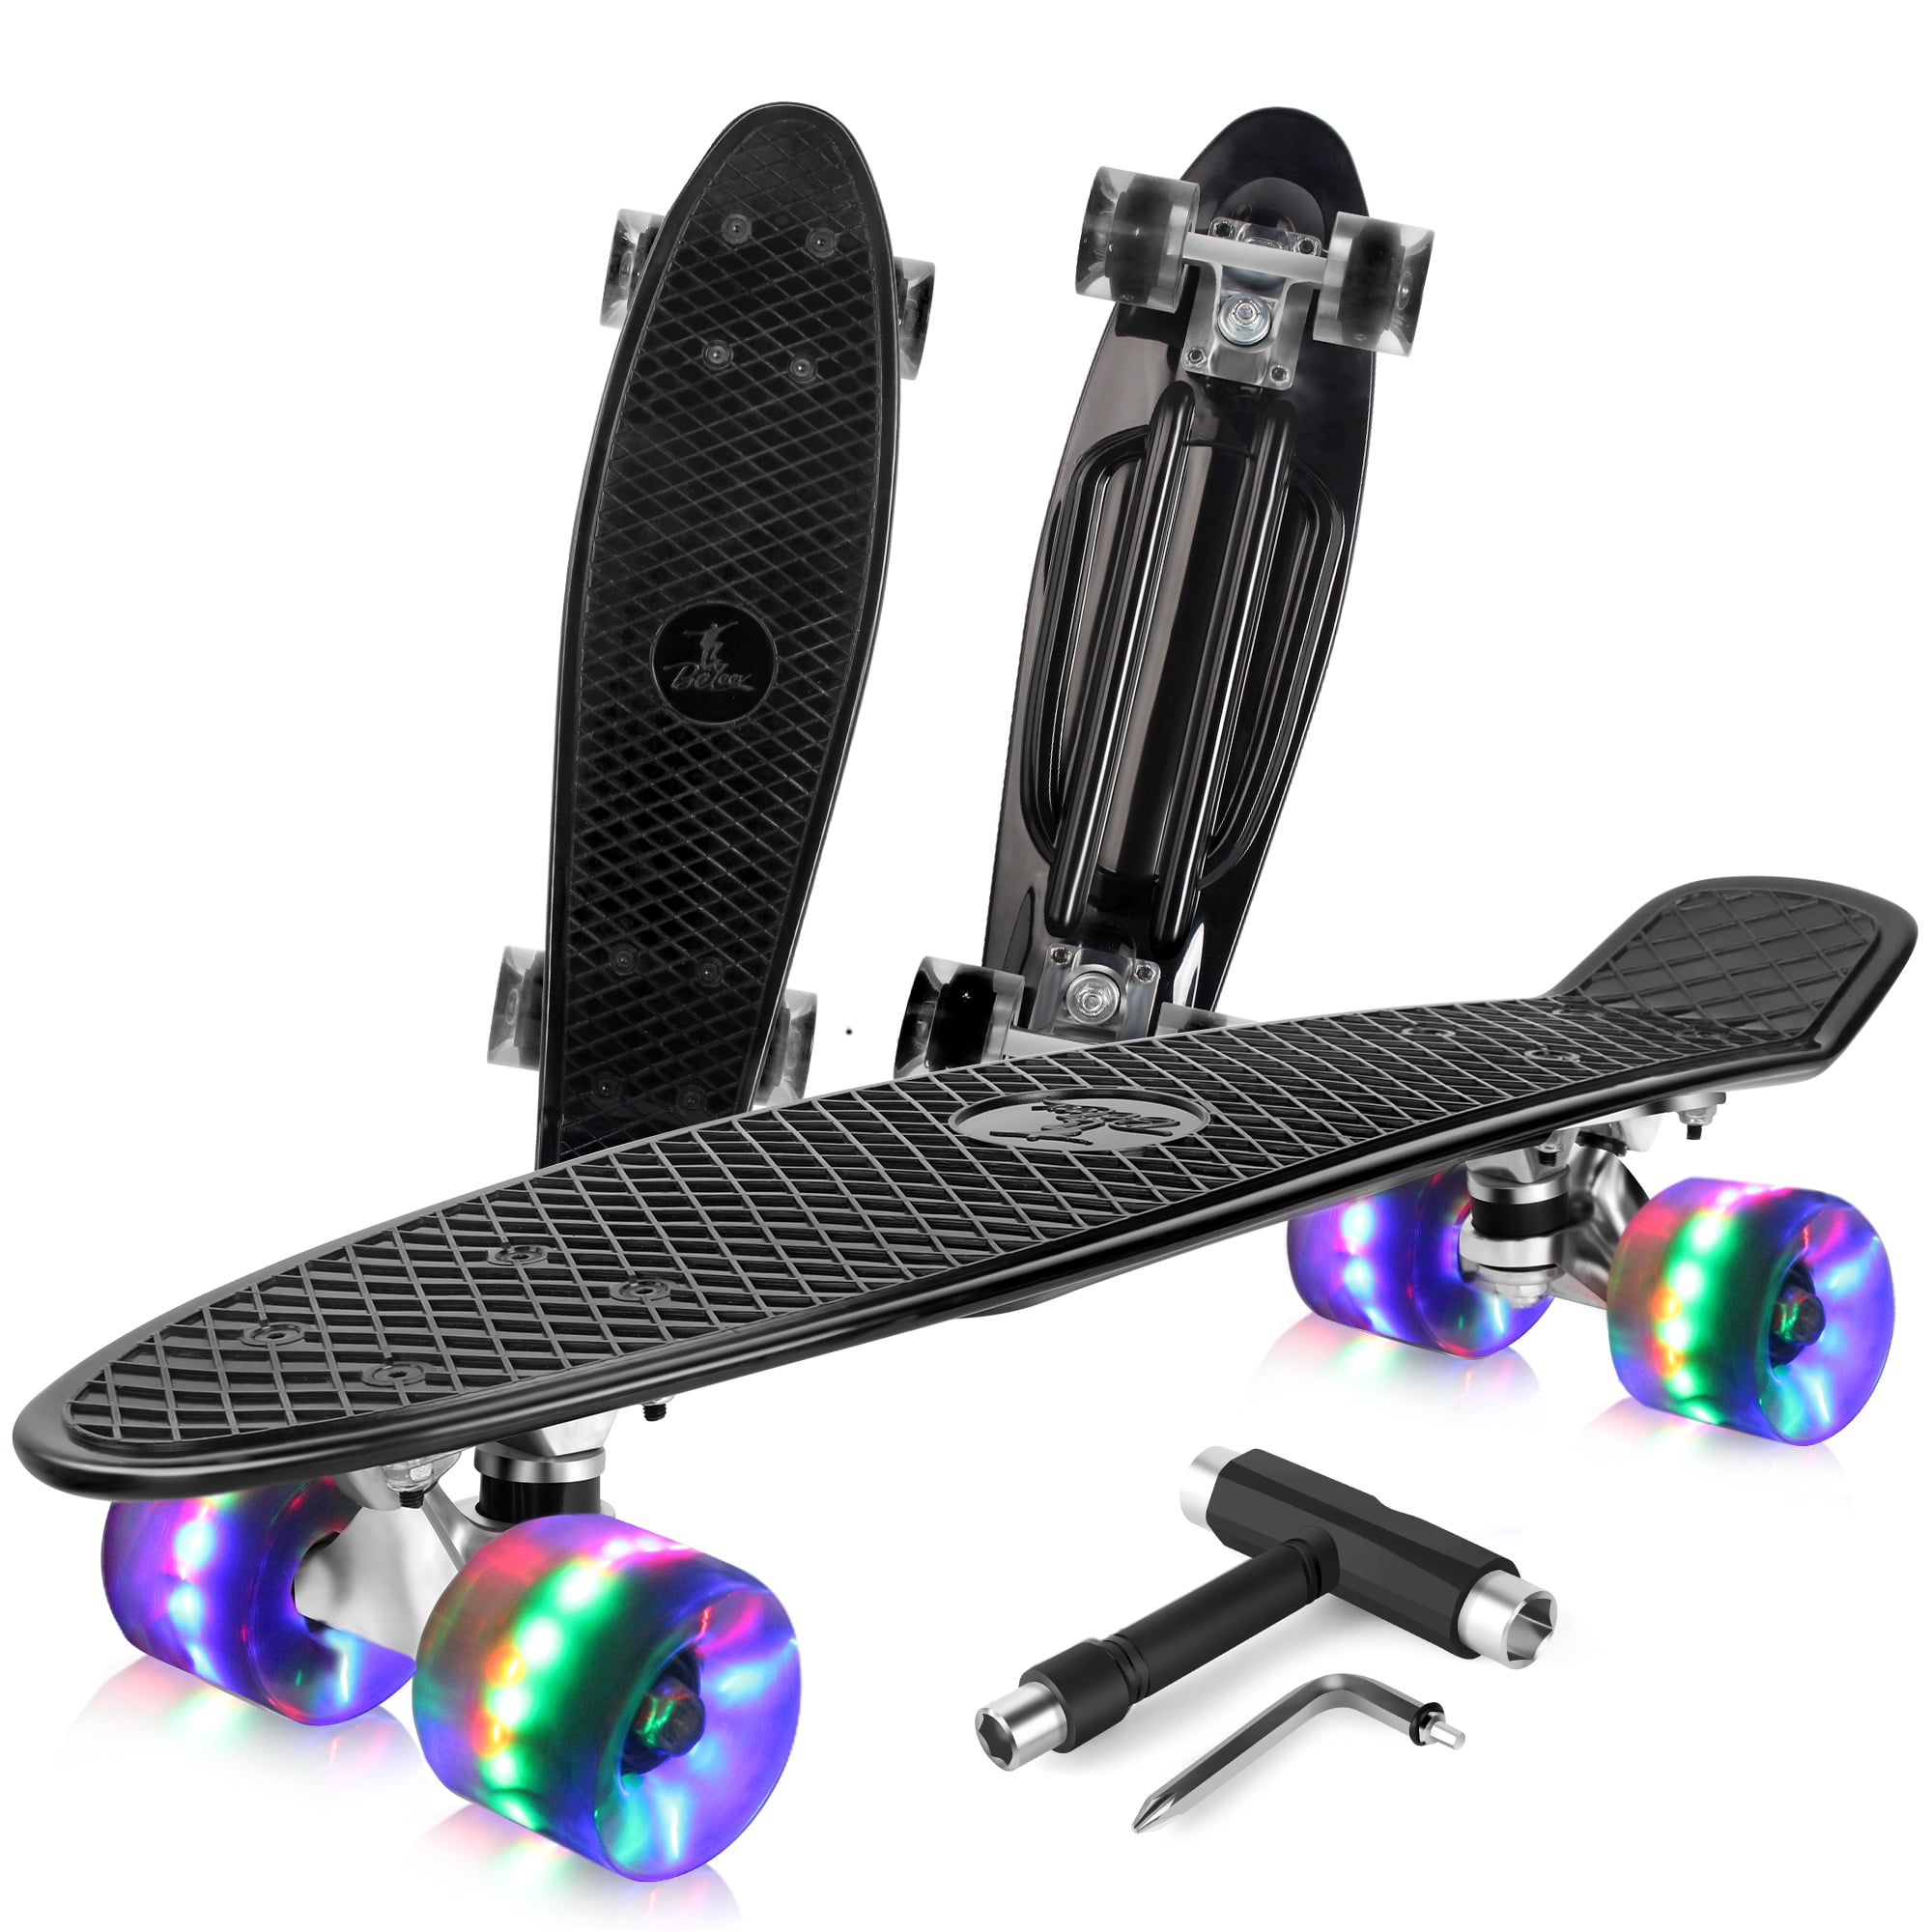 LED Light up Wheels with All-in-One Skate T-Tool for Beginners BELEEV Skateboard Complete Mini Cruiser Retro Skateboard for Kids Teens Adults